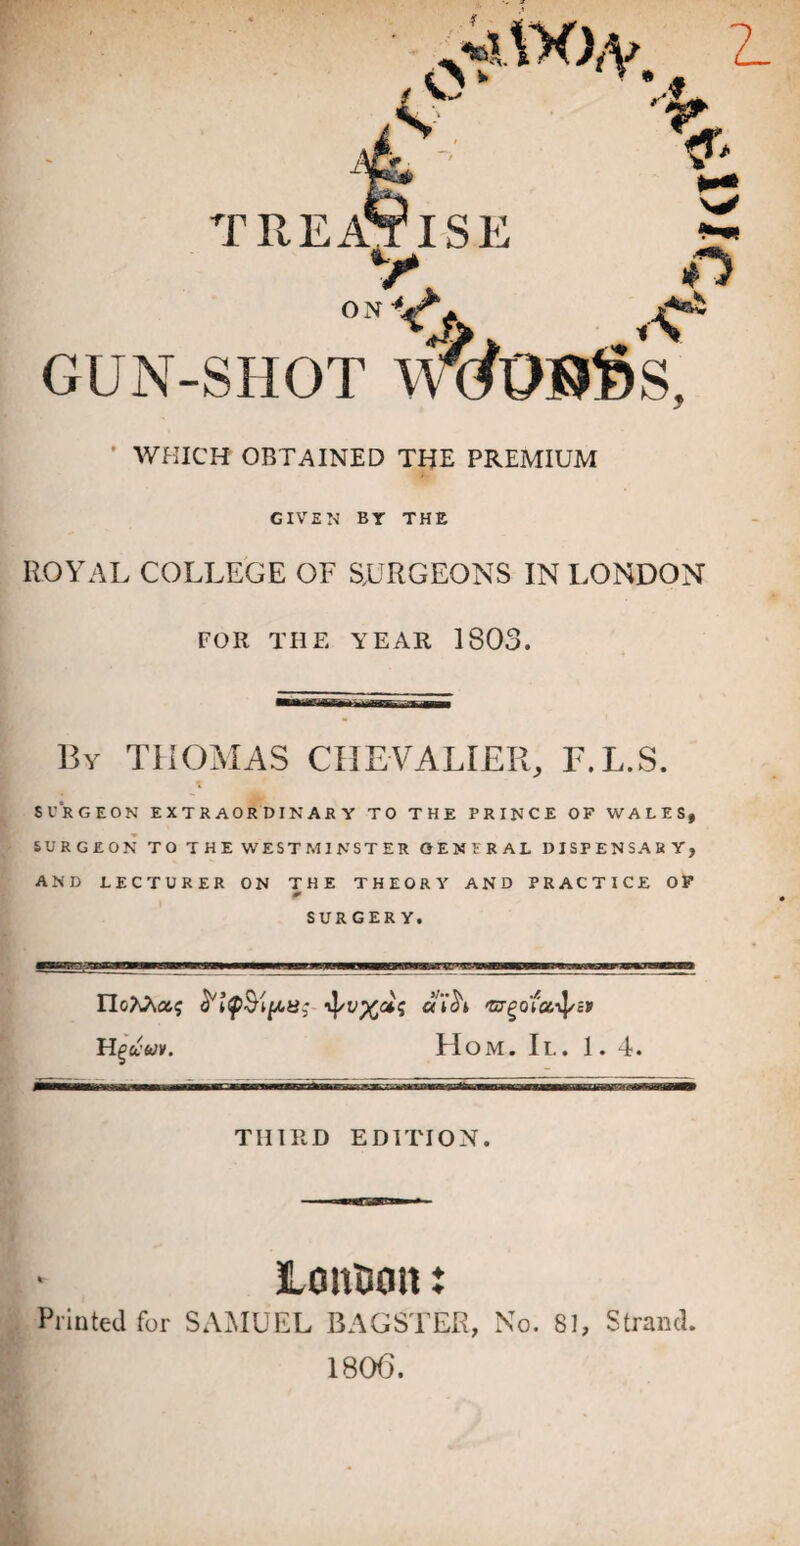 * WHICH OBTAINED THE PREMIUM GIVEN BY THE ROYAL COLLEGE OF STURGEONS IN LONDON FOR THE YEAR 1803. By THOMAS CHEVALIER, E.L.S. SURGEON EXTRAORDINARY TO THE PRINCE OF WALES, SURGEON TO THE WESTMINSTER GENERAL DISPENSARY, AND LECTURER ON THE THEORY AND PRACTICE OF SURGERY. ■vp IloM&q ^/v^dq a'ih vrgofoiiJ/J* Hguuv. Hom. II. 1. 4. THIRD EDITION. Consult: Printed for SAJIUKL BAGSTER, No. 81, Strand. 180(3.